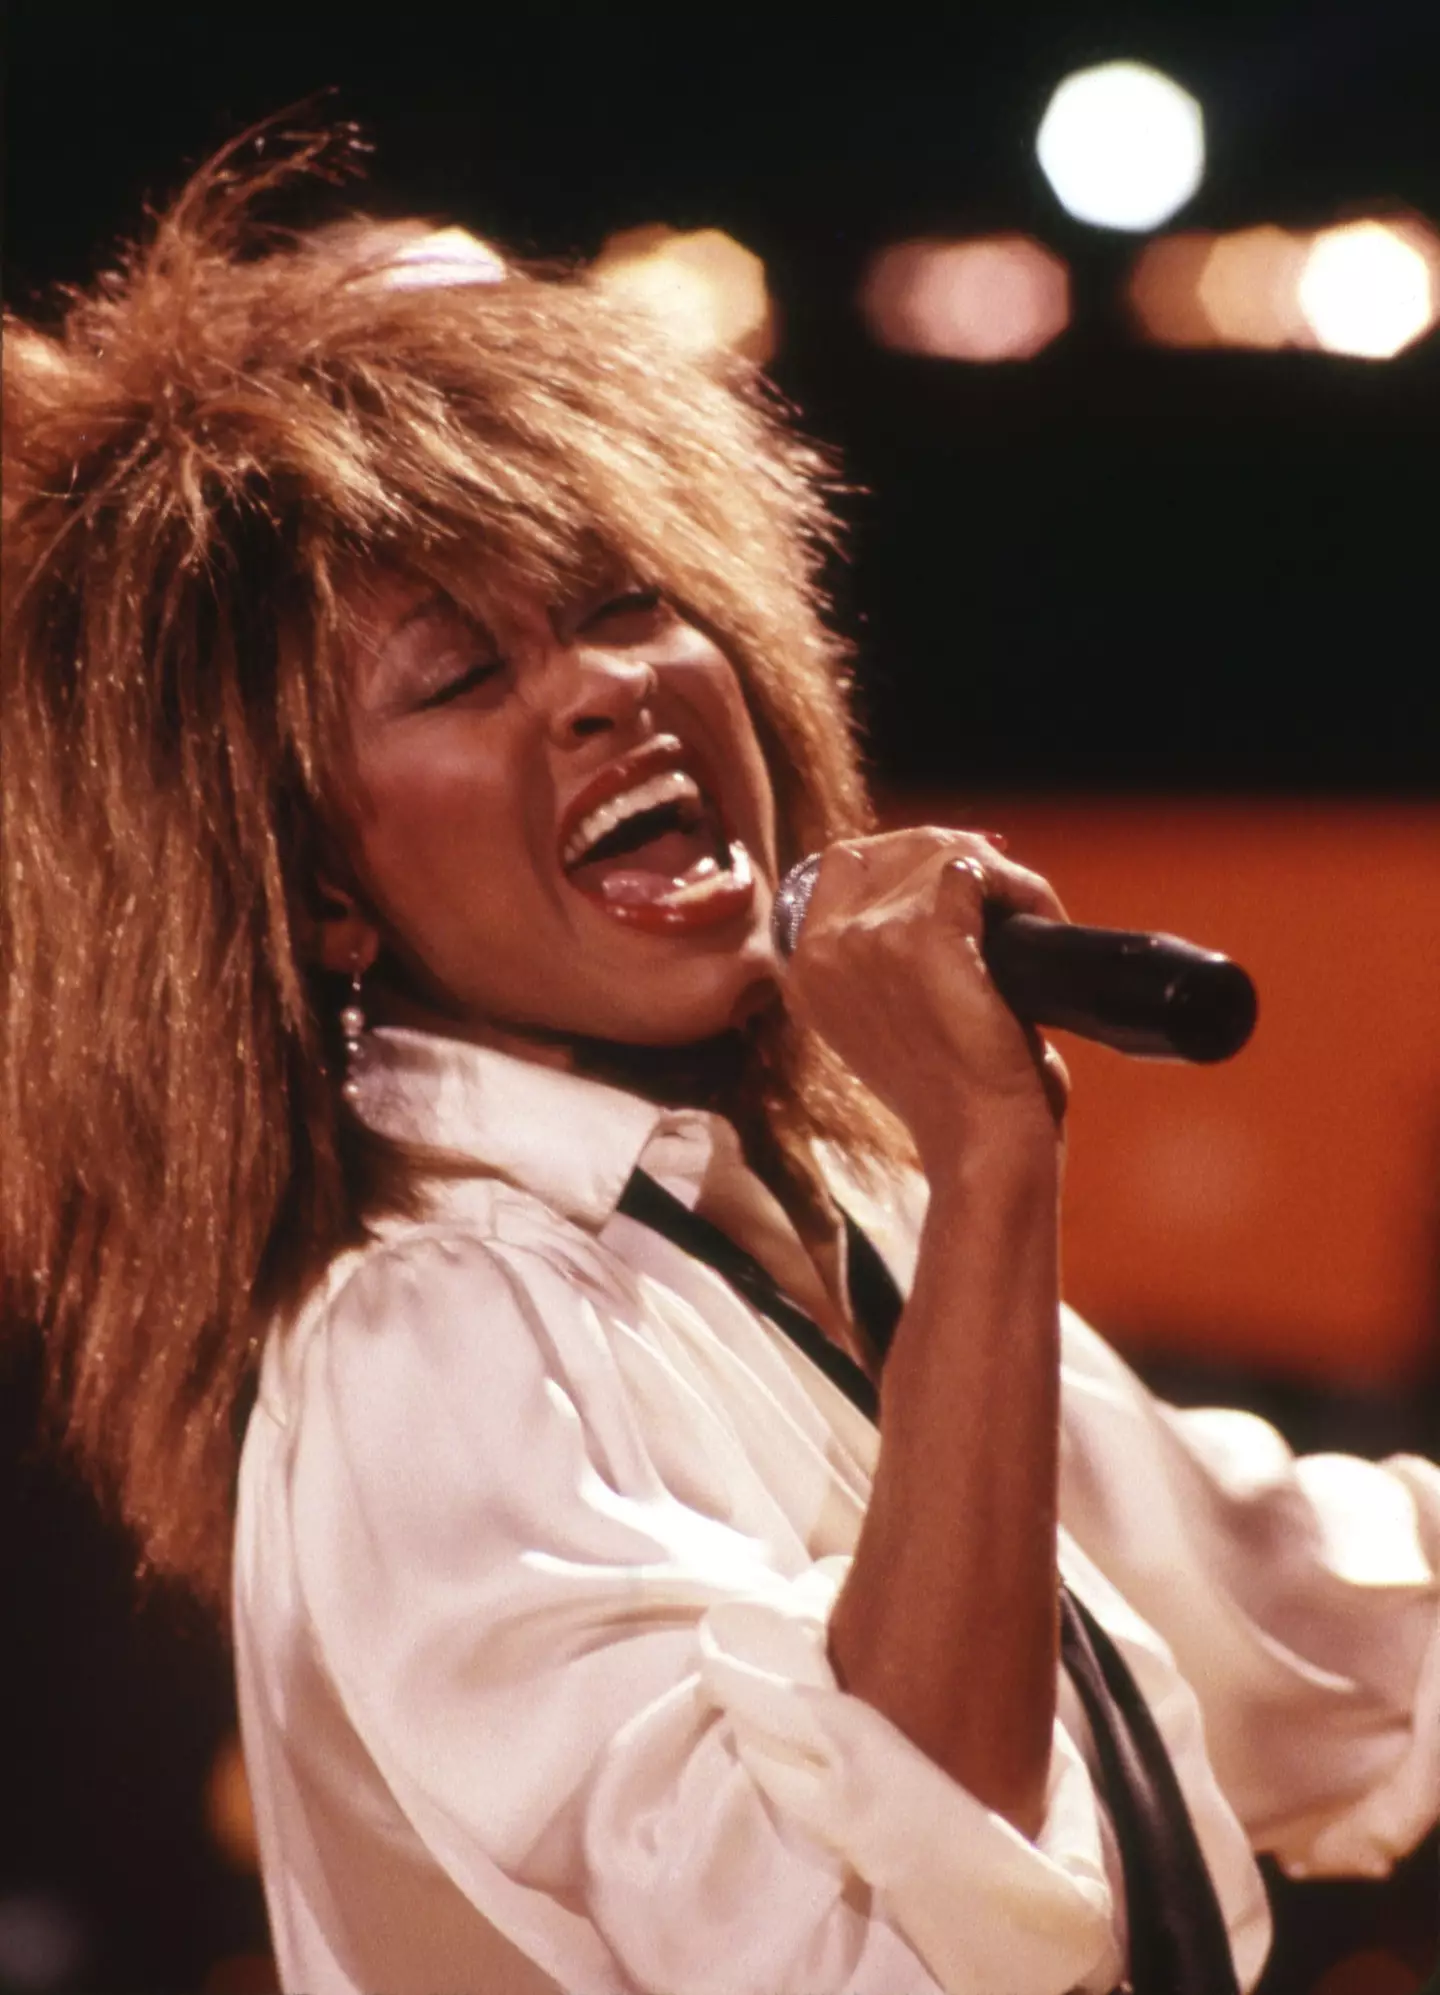 Tina Turner has died aged 83.